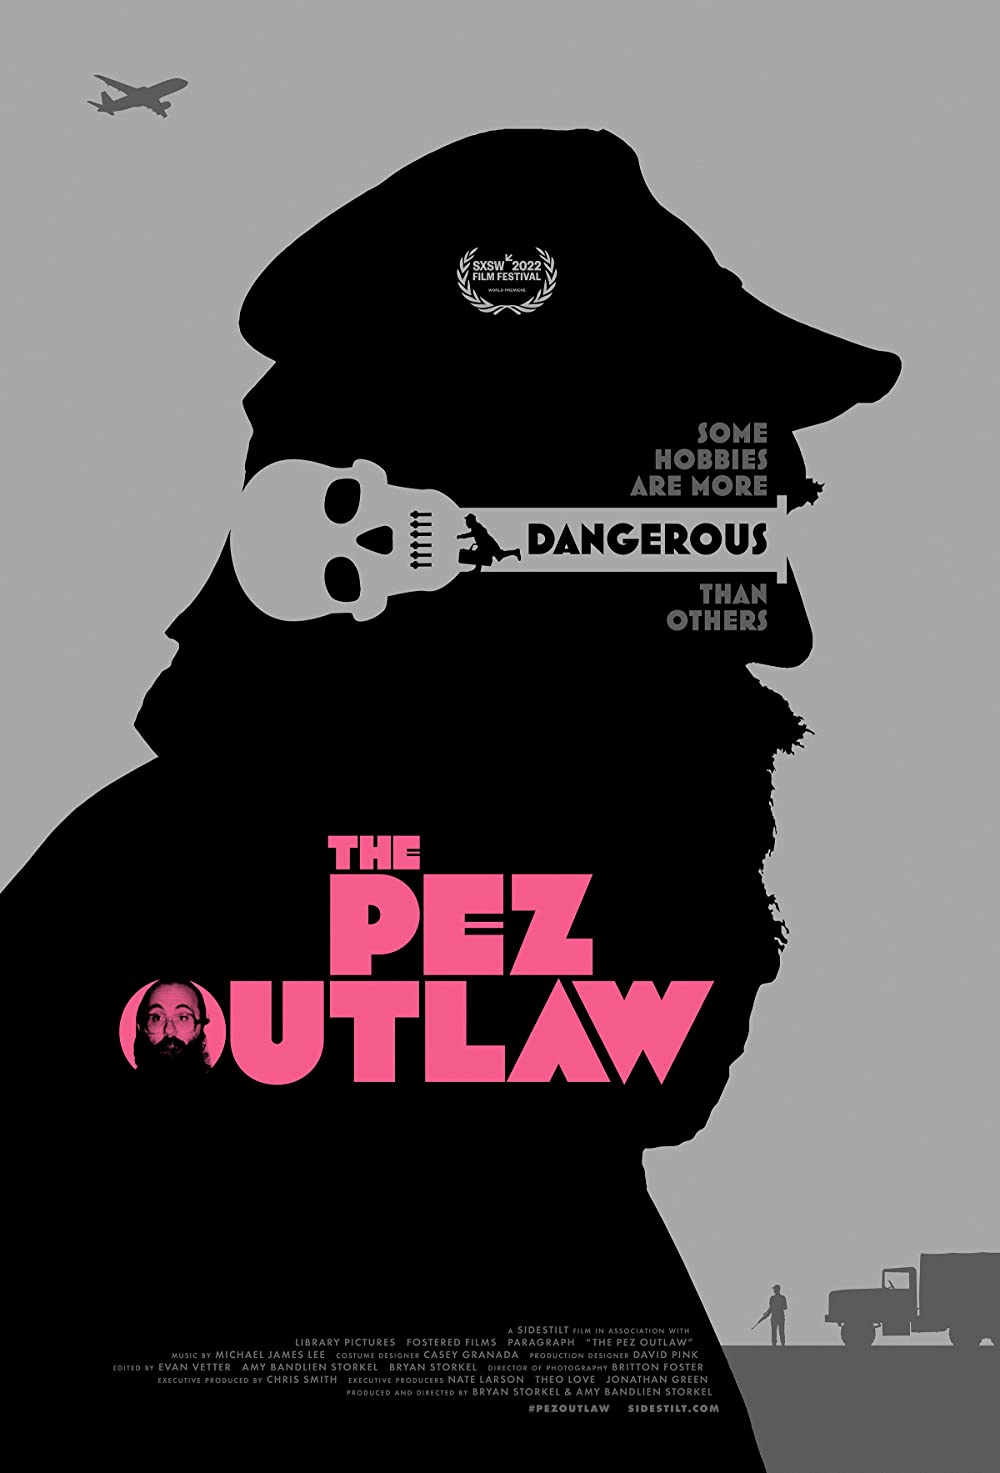 The Pez Outlaw Movie 2022, Official Trailer, Release Date